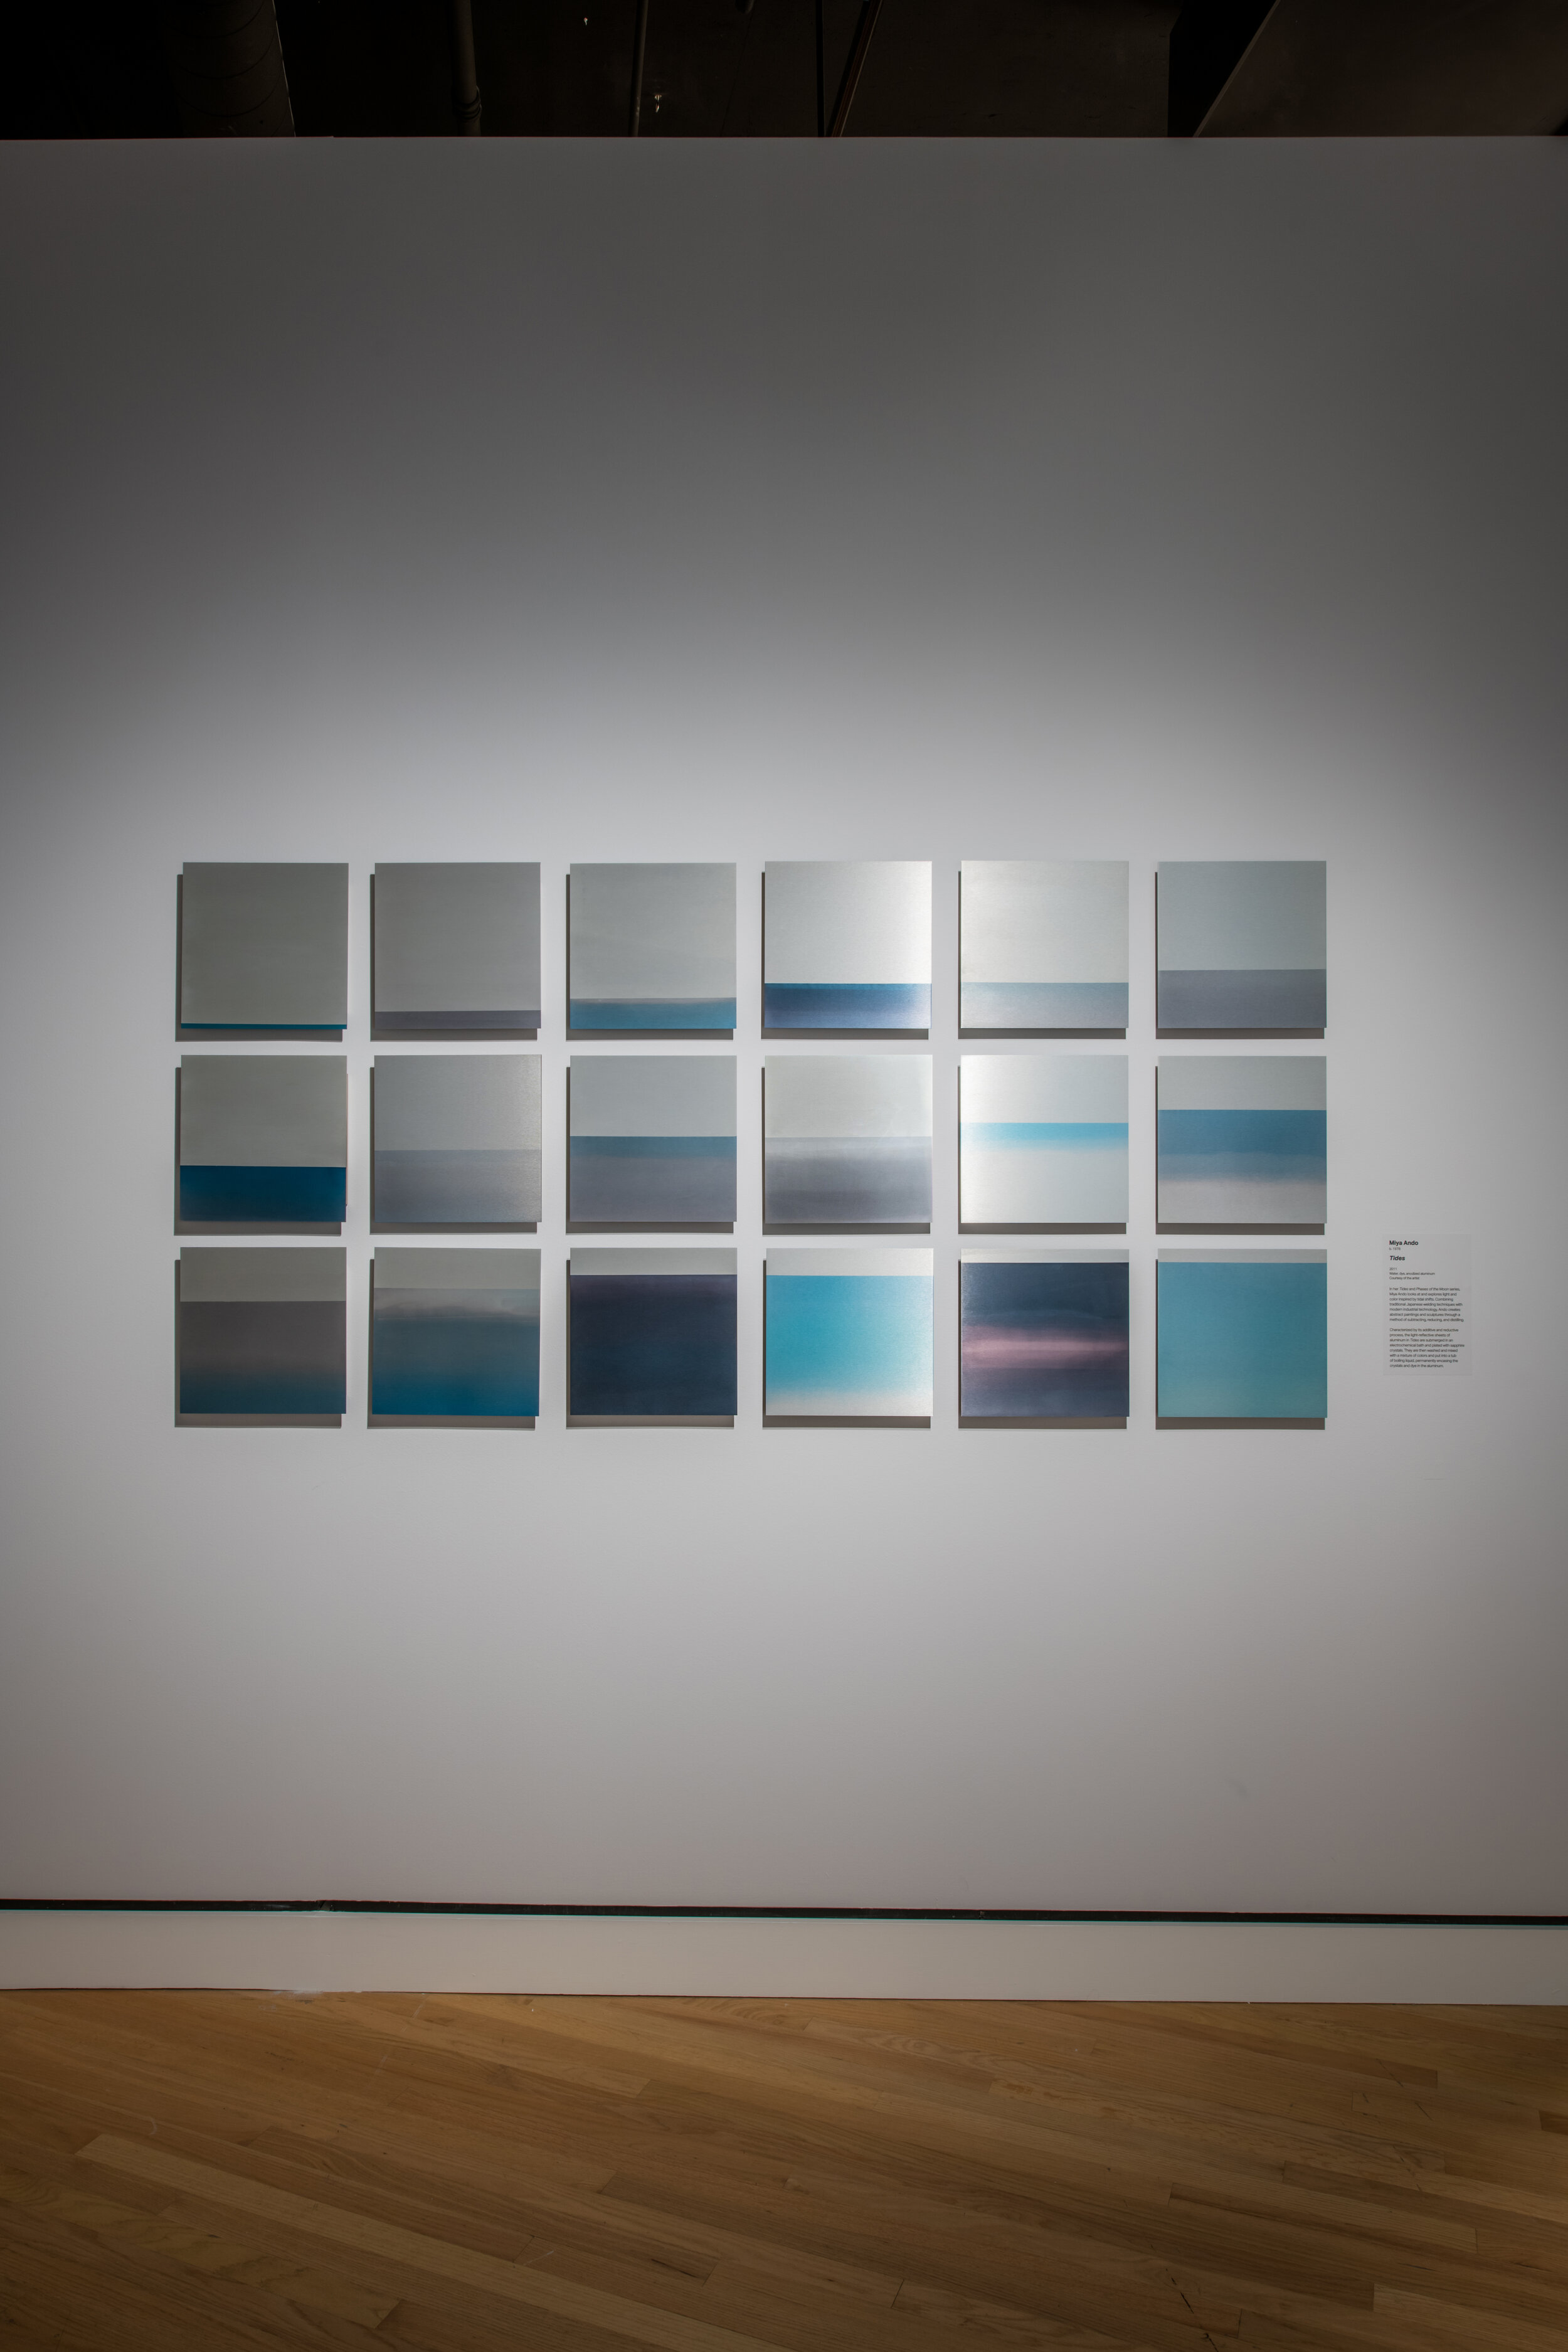  TIDES, 2011 WATER, DYE, ANODIZED ALUMINUM 36 X 72 INCHES (EACH PANEL 12X12 INCHES)  PHOTO COURTESY OF CRYSTAL BRIDGES MUSEUM OF ART, BENTONVILLE, AK, CRYSTALS IN ART: ANCIENT TO TODAY. PHOTO CREDIT: STEPHEN IRONSIDE 